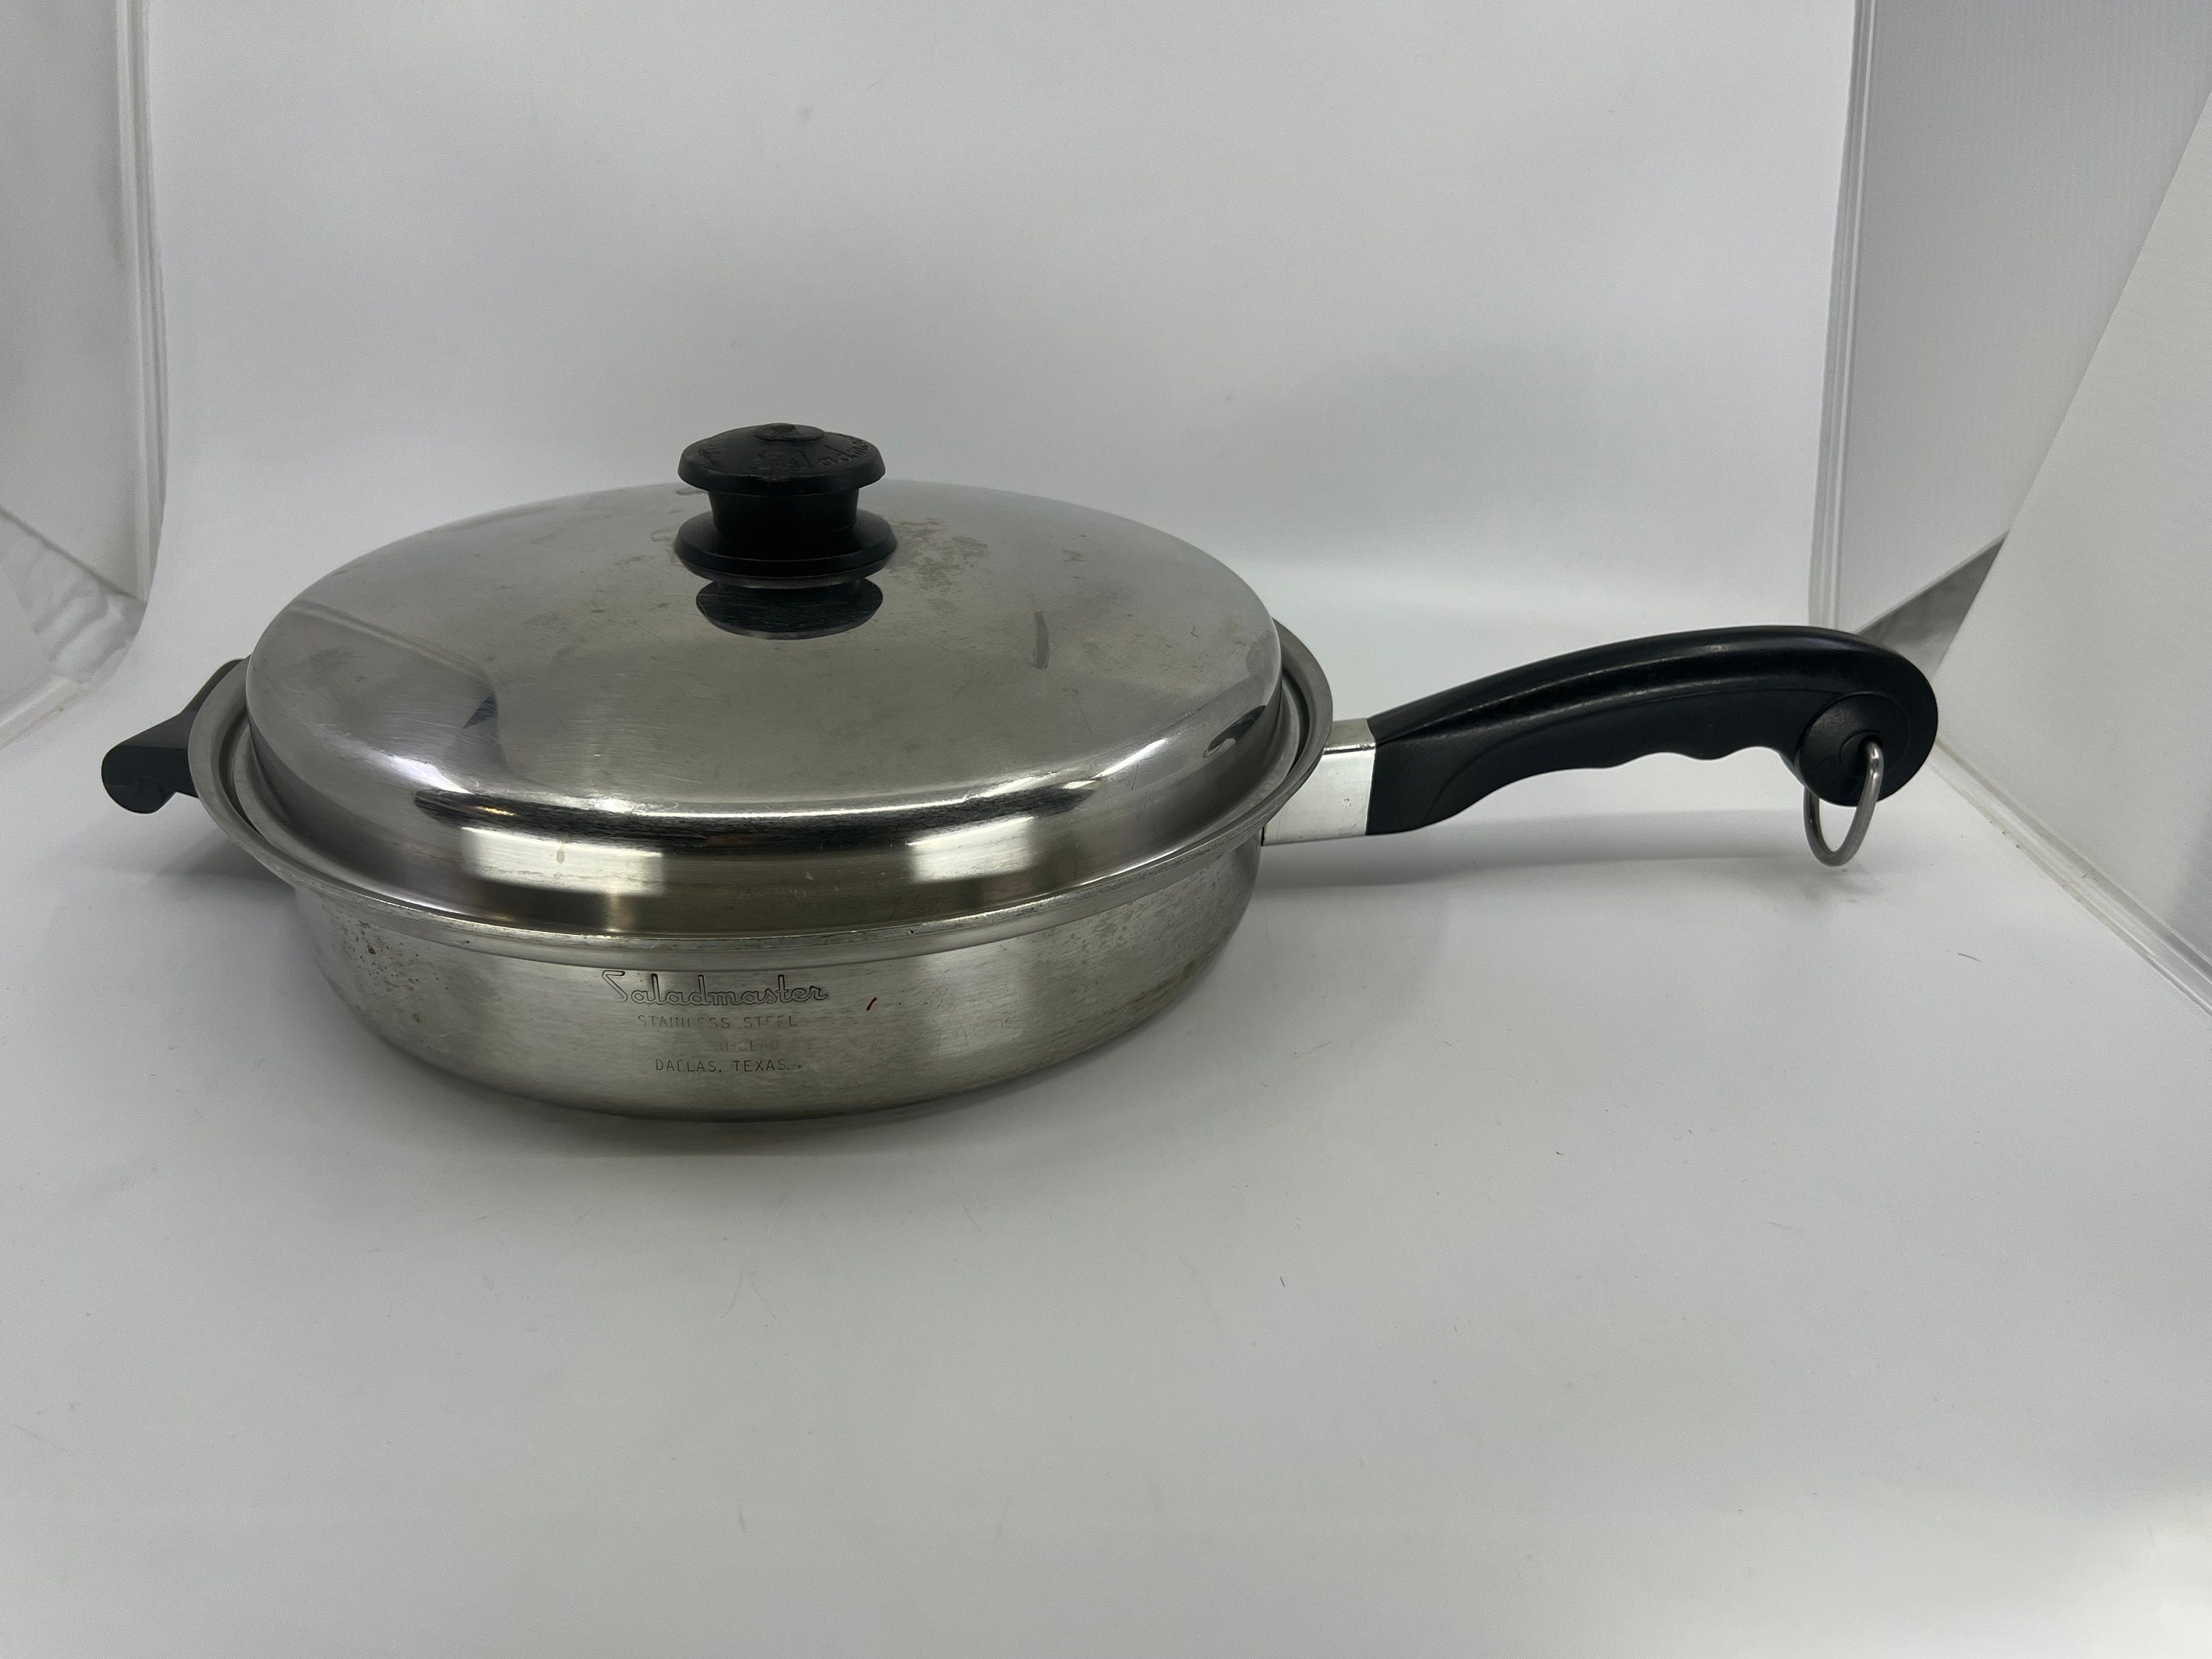 Saladmaster > Our Products > 2 Qt. Sauce Pan With Cover